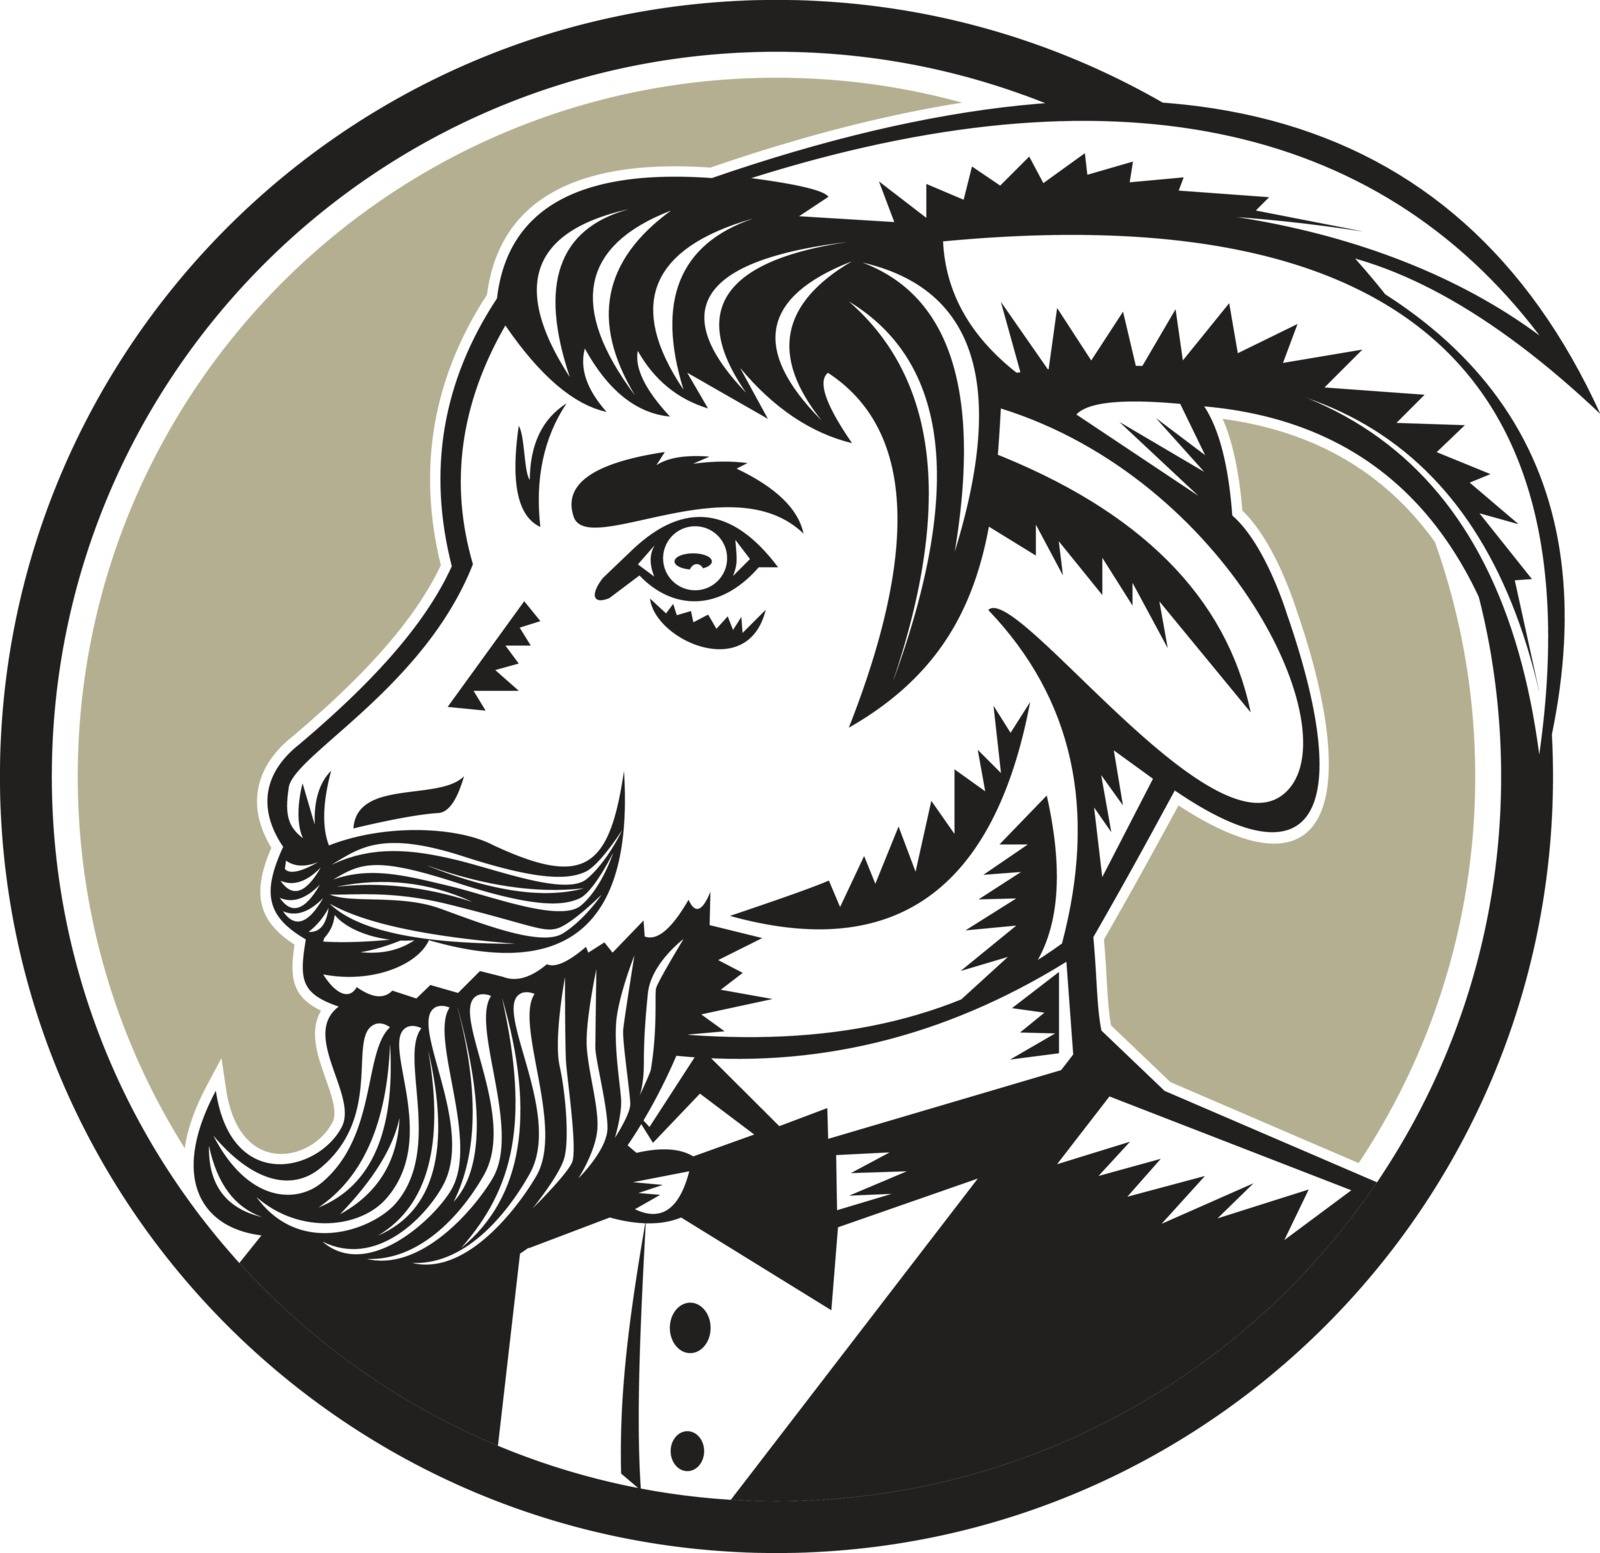 Illustration of a goat ram with big horns and moustache beard wearing tuxedo suit looking to the side set inside circle done in retro woodcut style. 